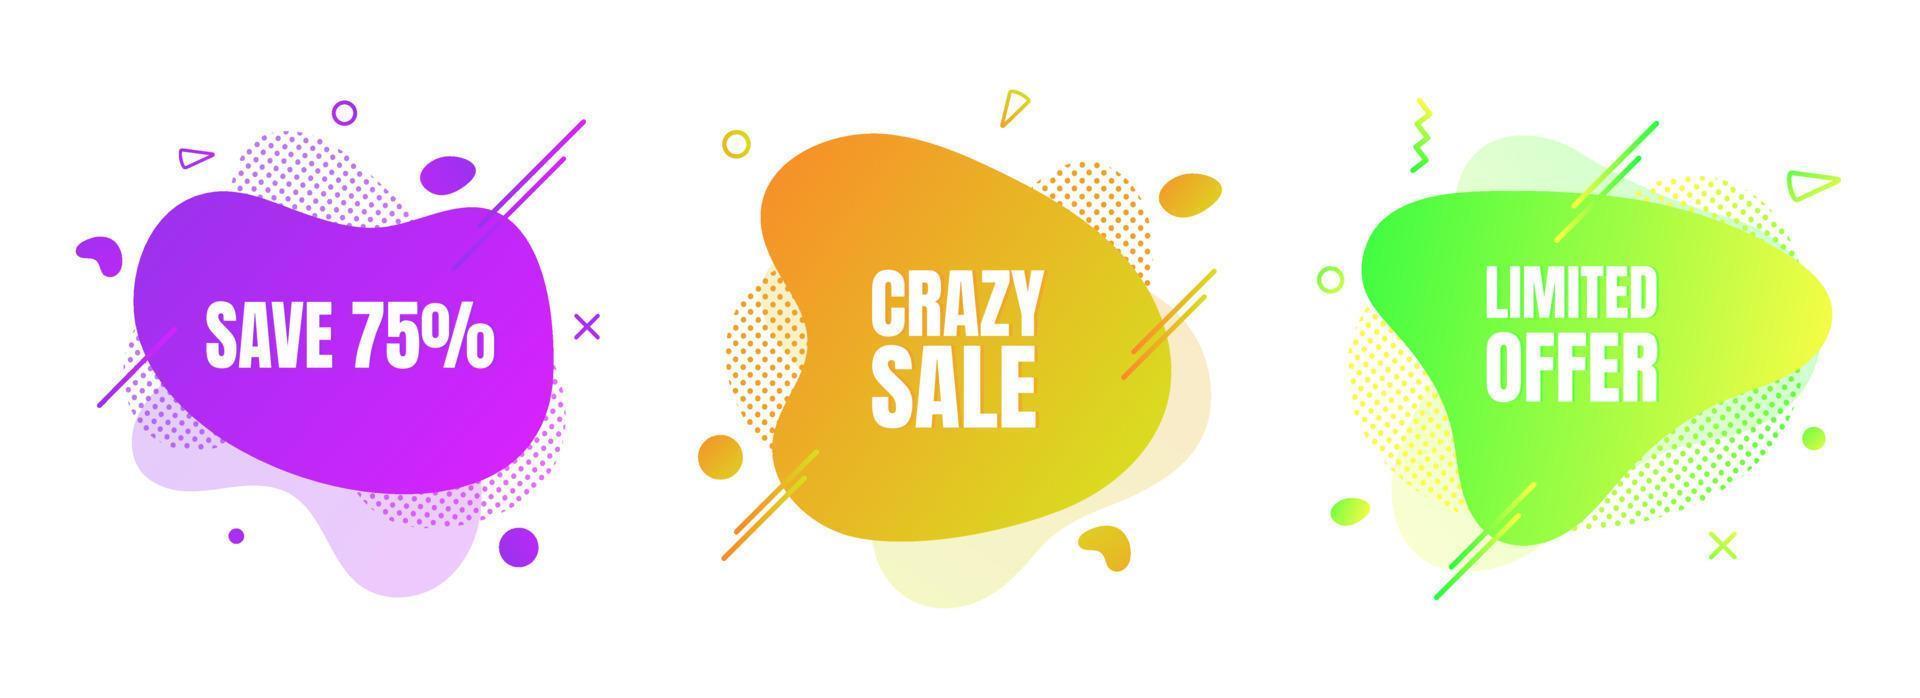 3 modern liquid abstract special offer price sign SAVE 75, CRAZY SALE, LIMITED OFFER text gradient flat style design fluid vector colorful vector illustration banner simple shape advertising.